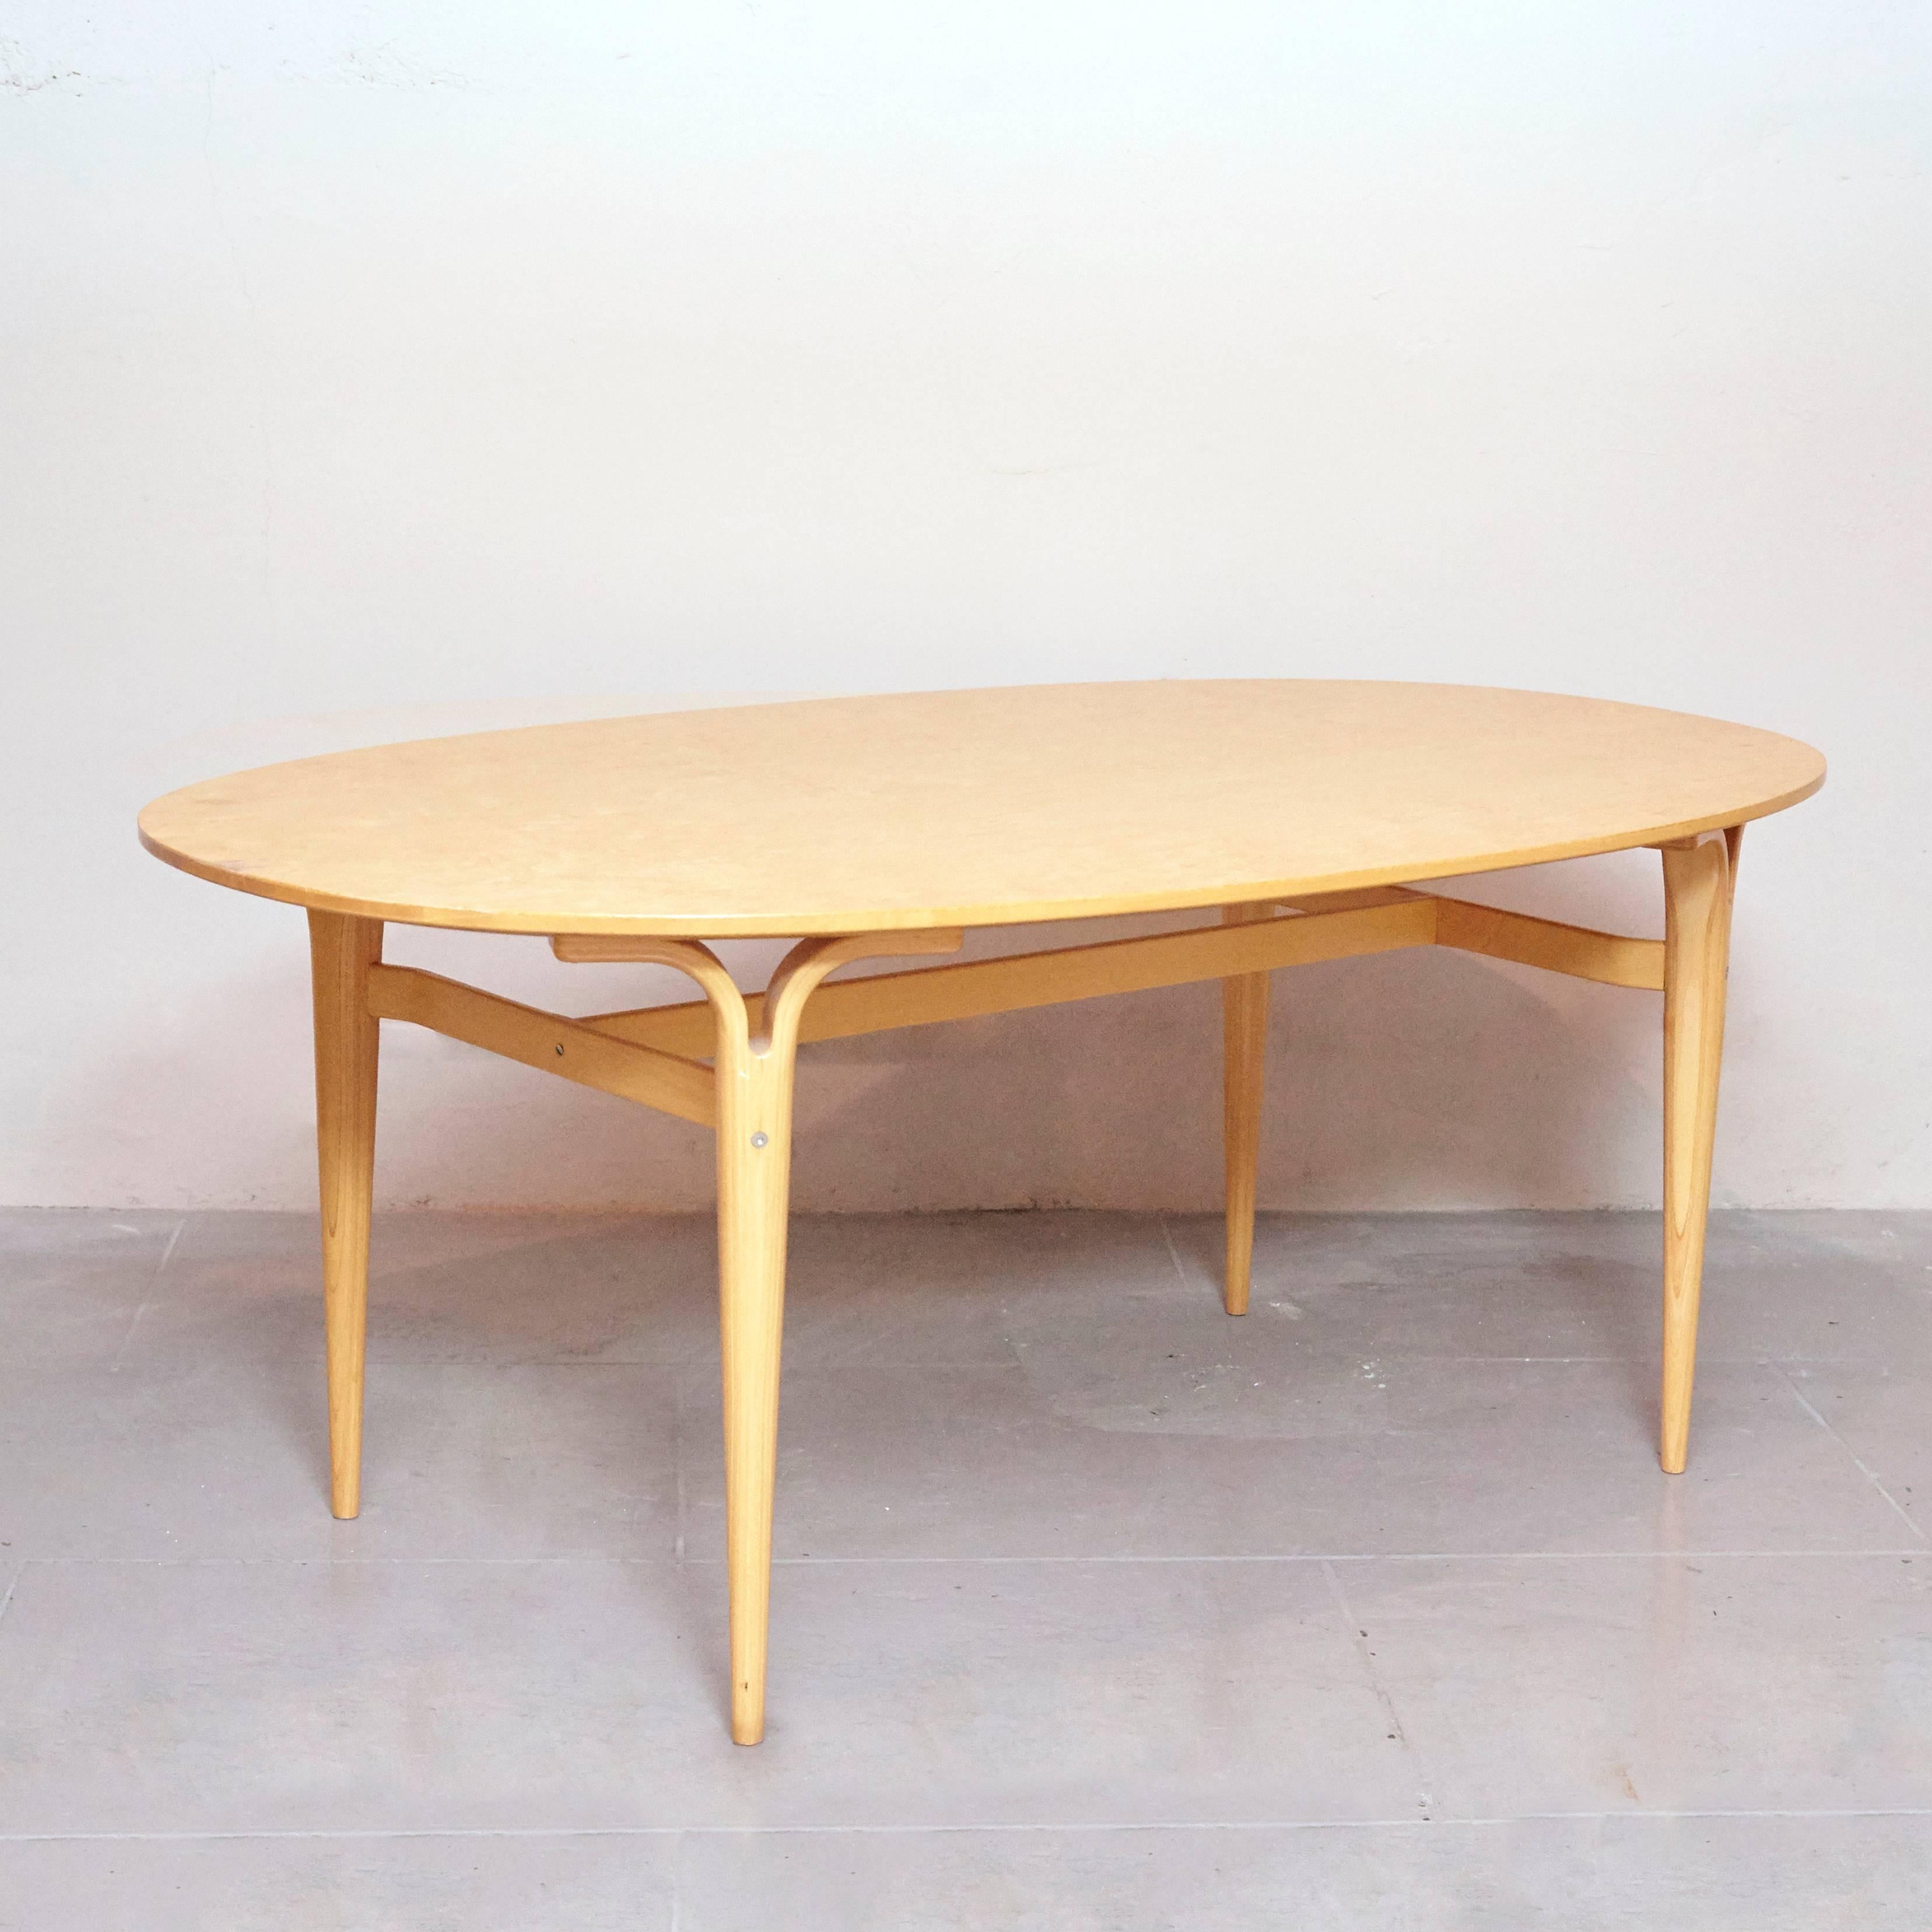 Dining table designed by Bruno Mathsson in Sweden, circa 1960.
Manufactured by Mathsson International.

In good original condition, with minor wear consistent with age and use.

Bruno Mathsson was born in Värnamo in 1907, he became an important